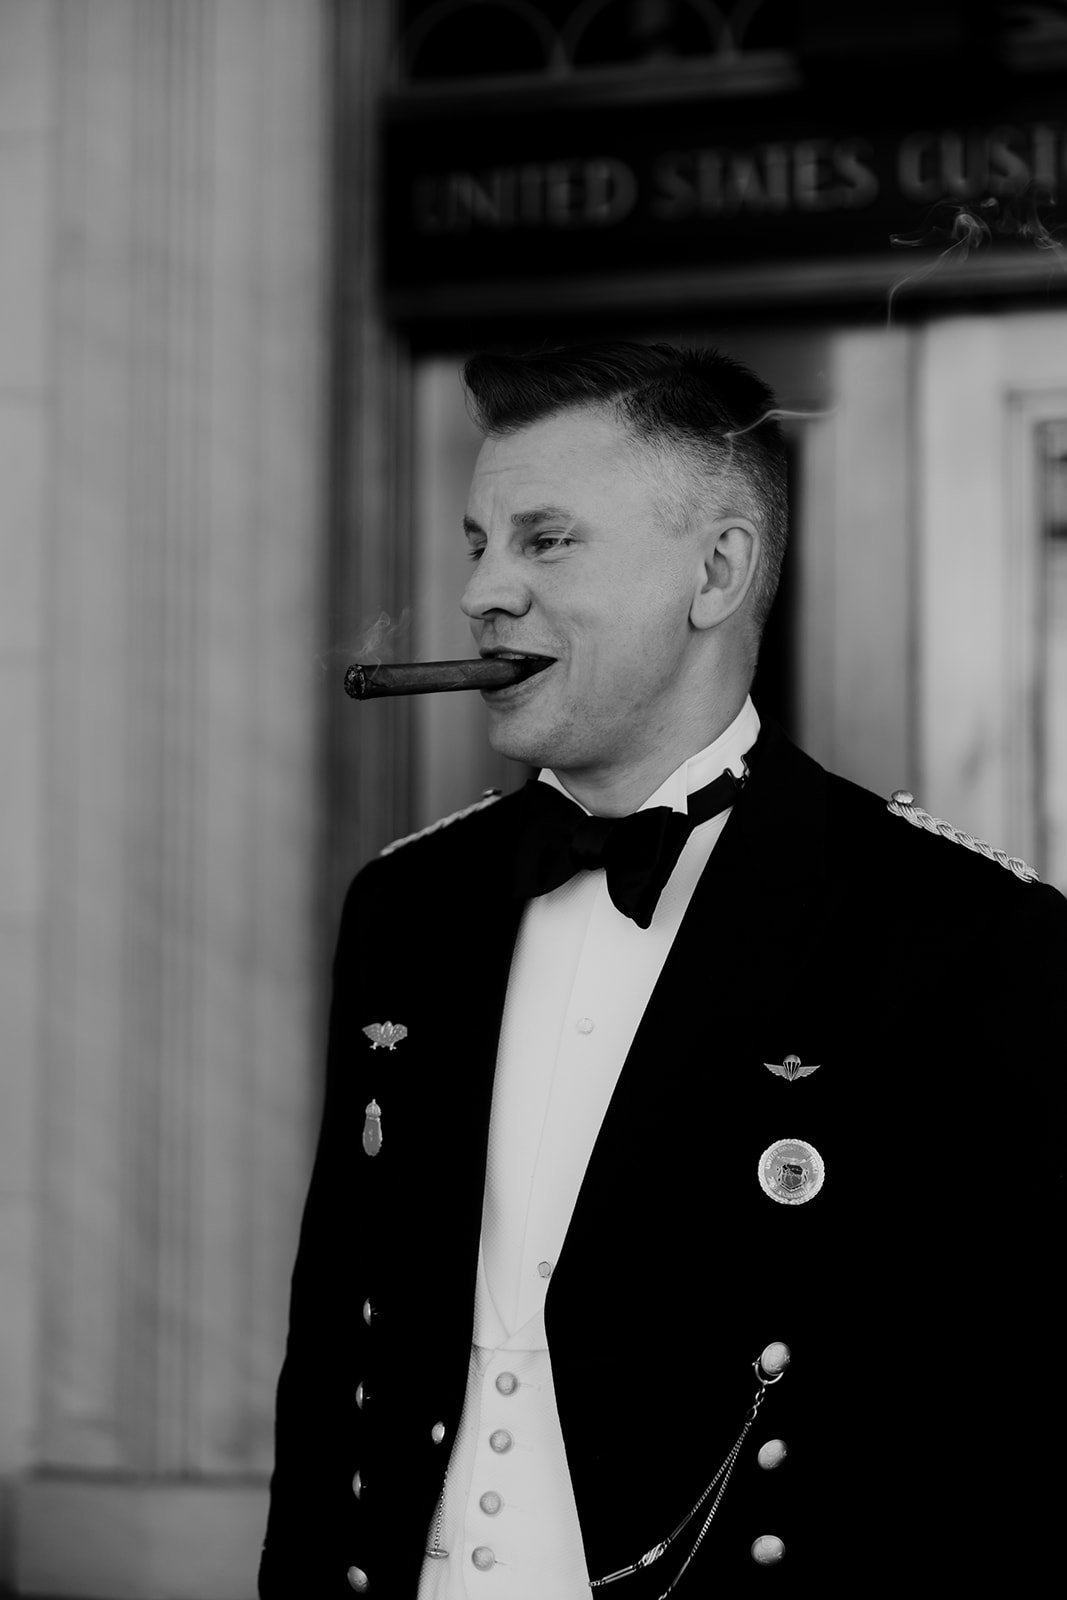 Man in military uniform with cigar in mouth and a little smoke